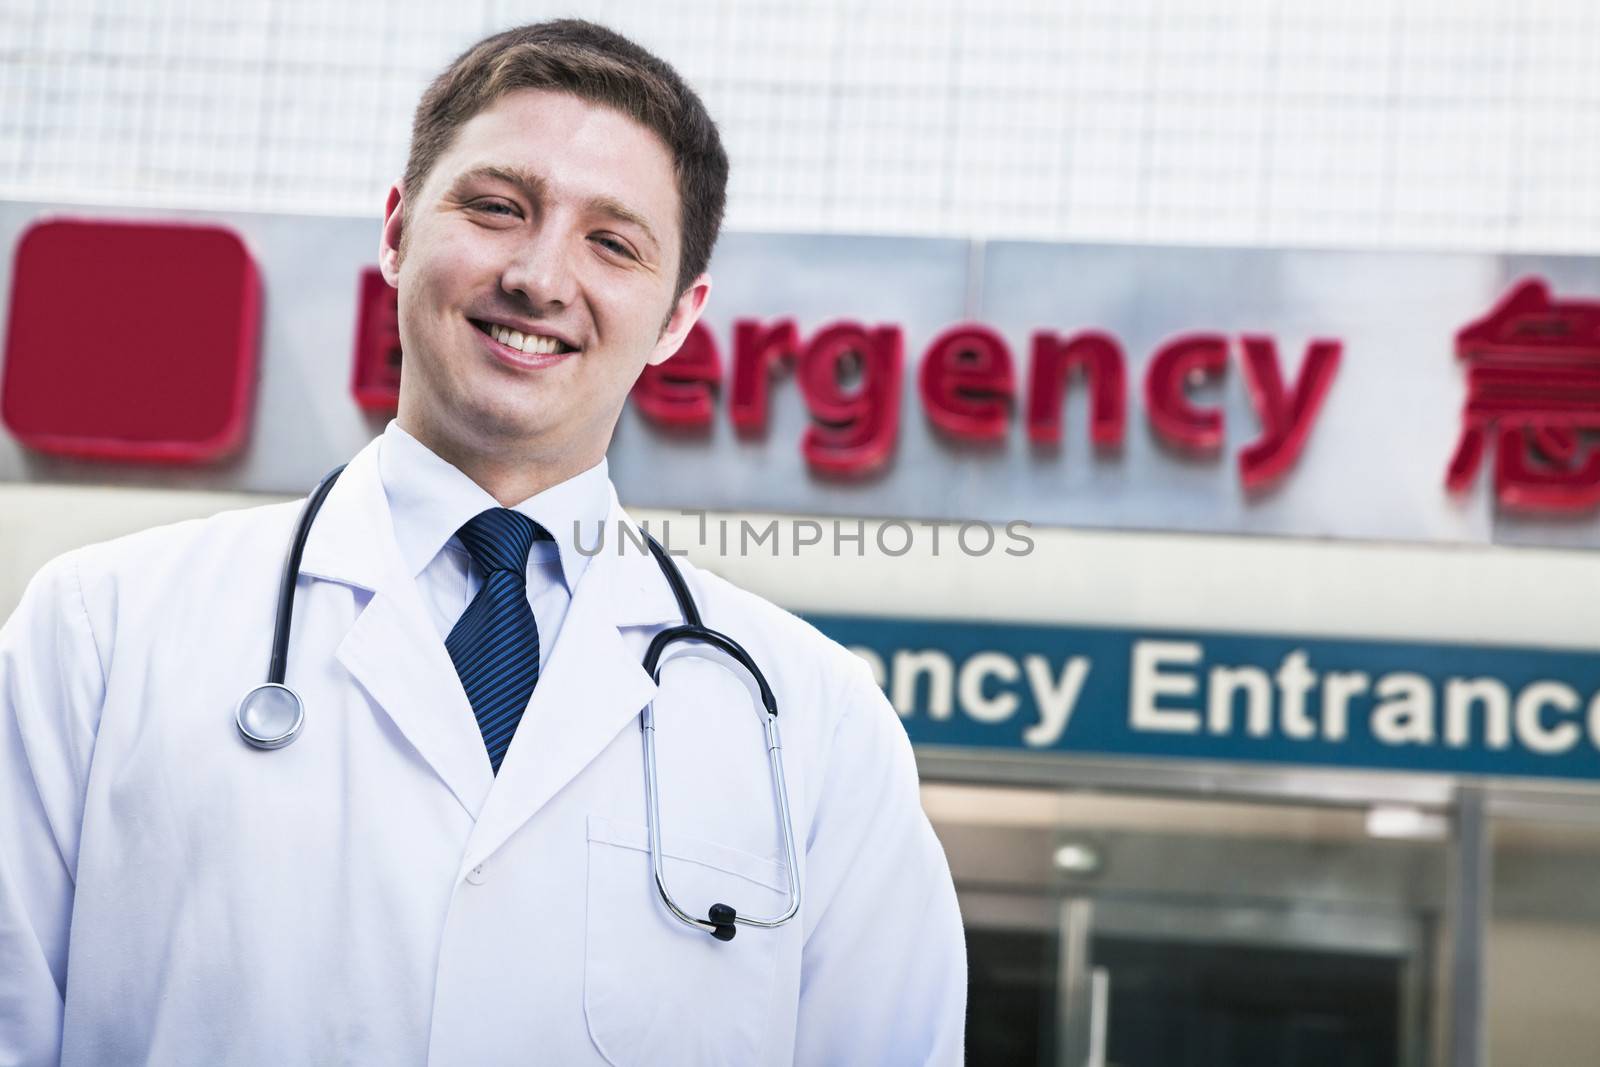 Portrait of young smiling doctor outside of the hospital, emergency room sign in the background